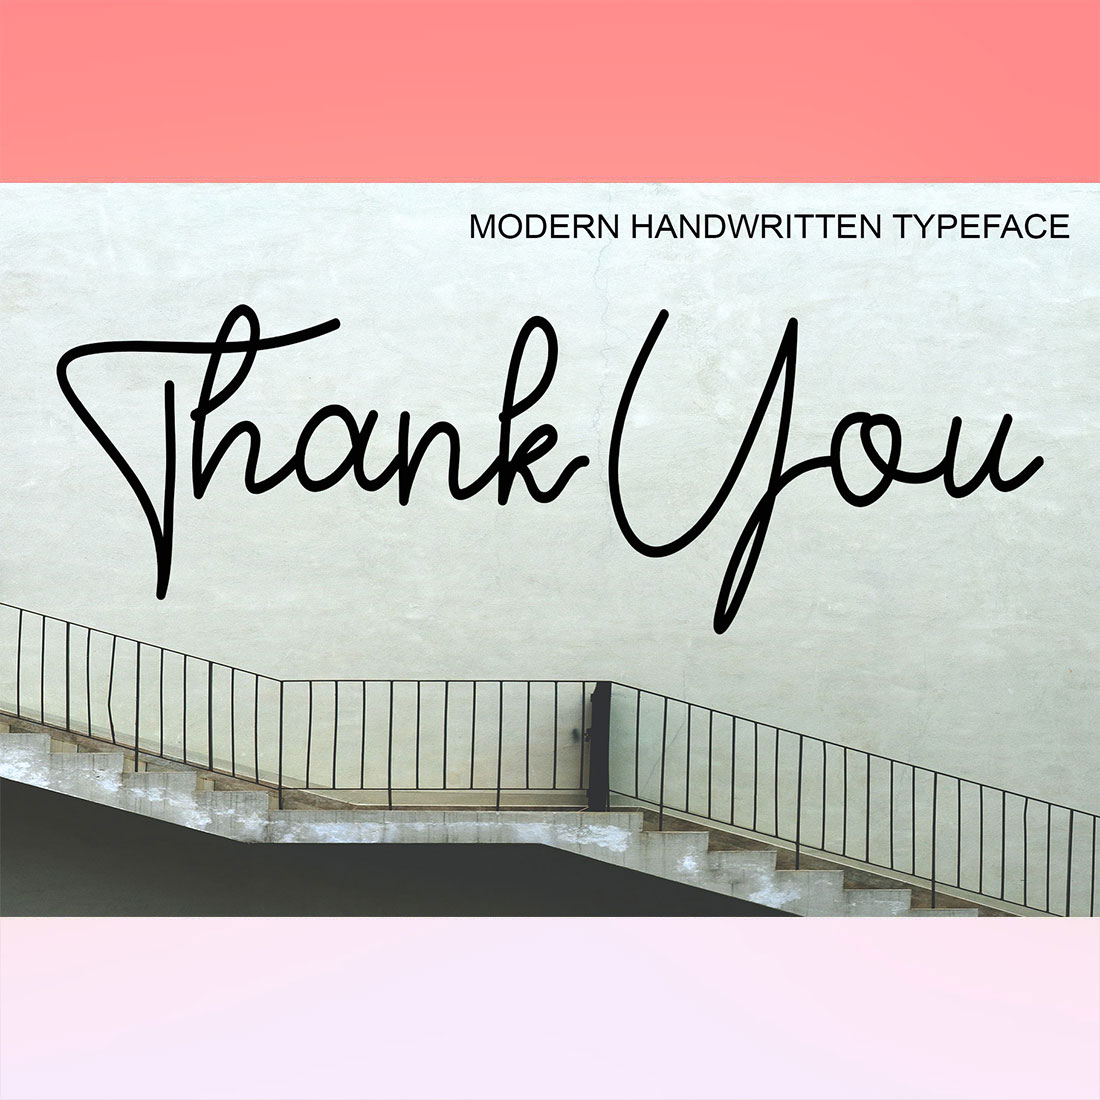 Handwritten thank you sign on the side of a building.